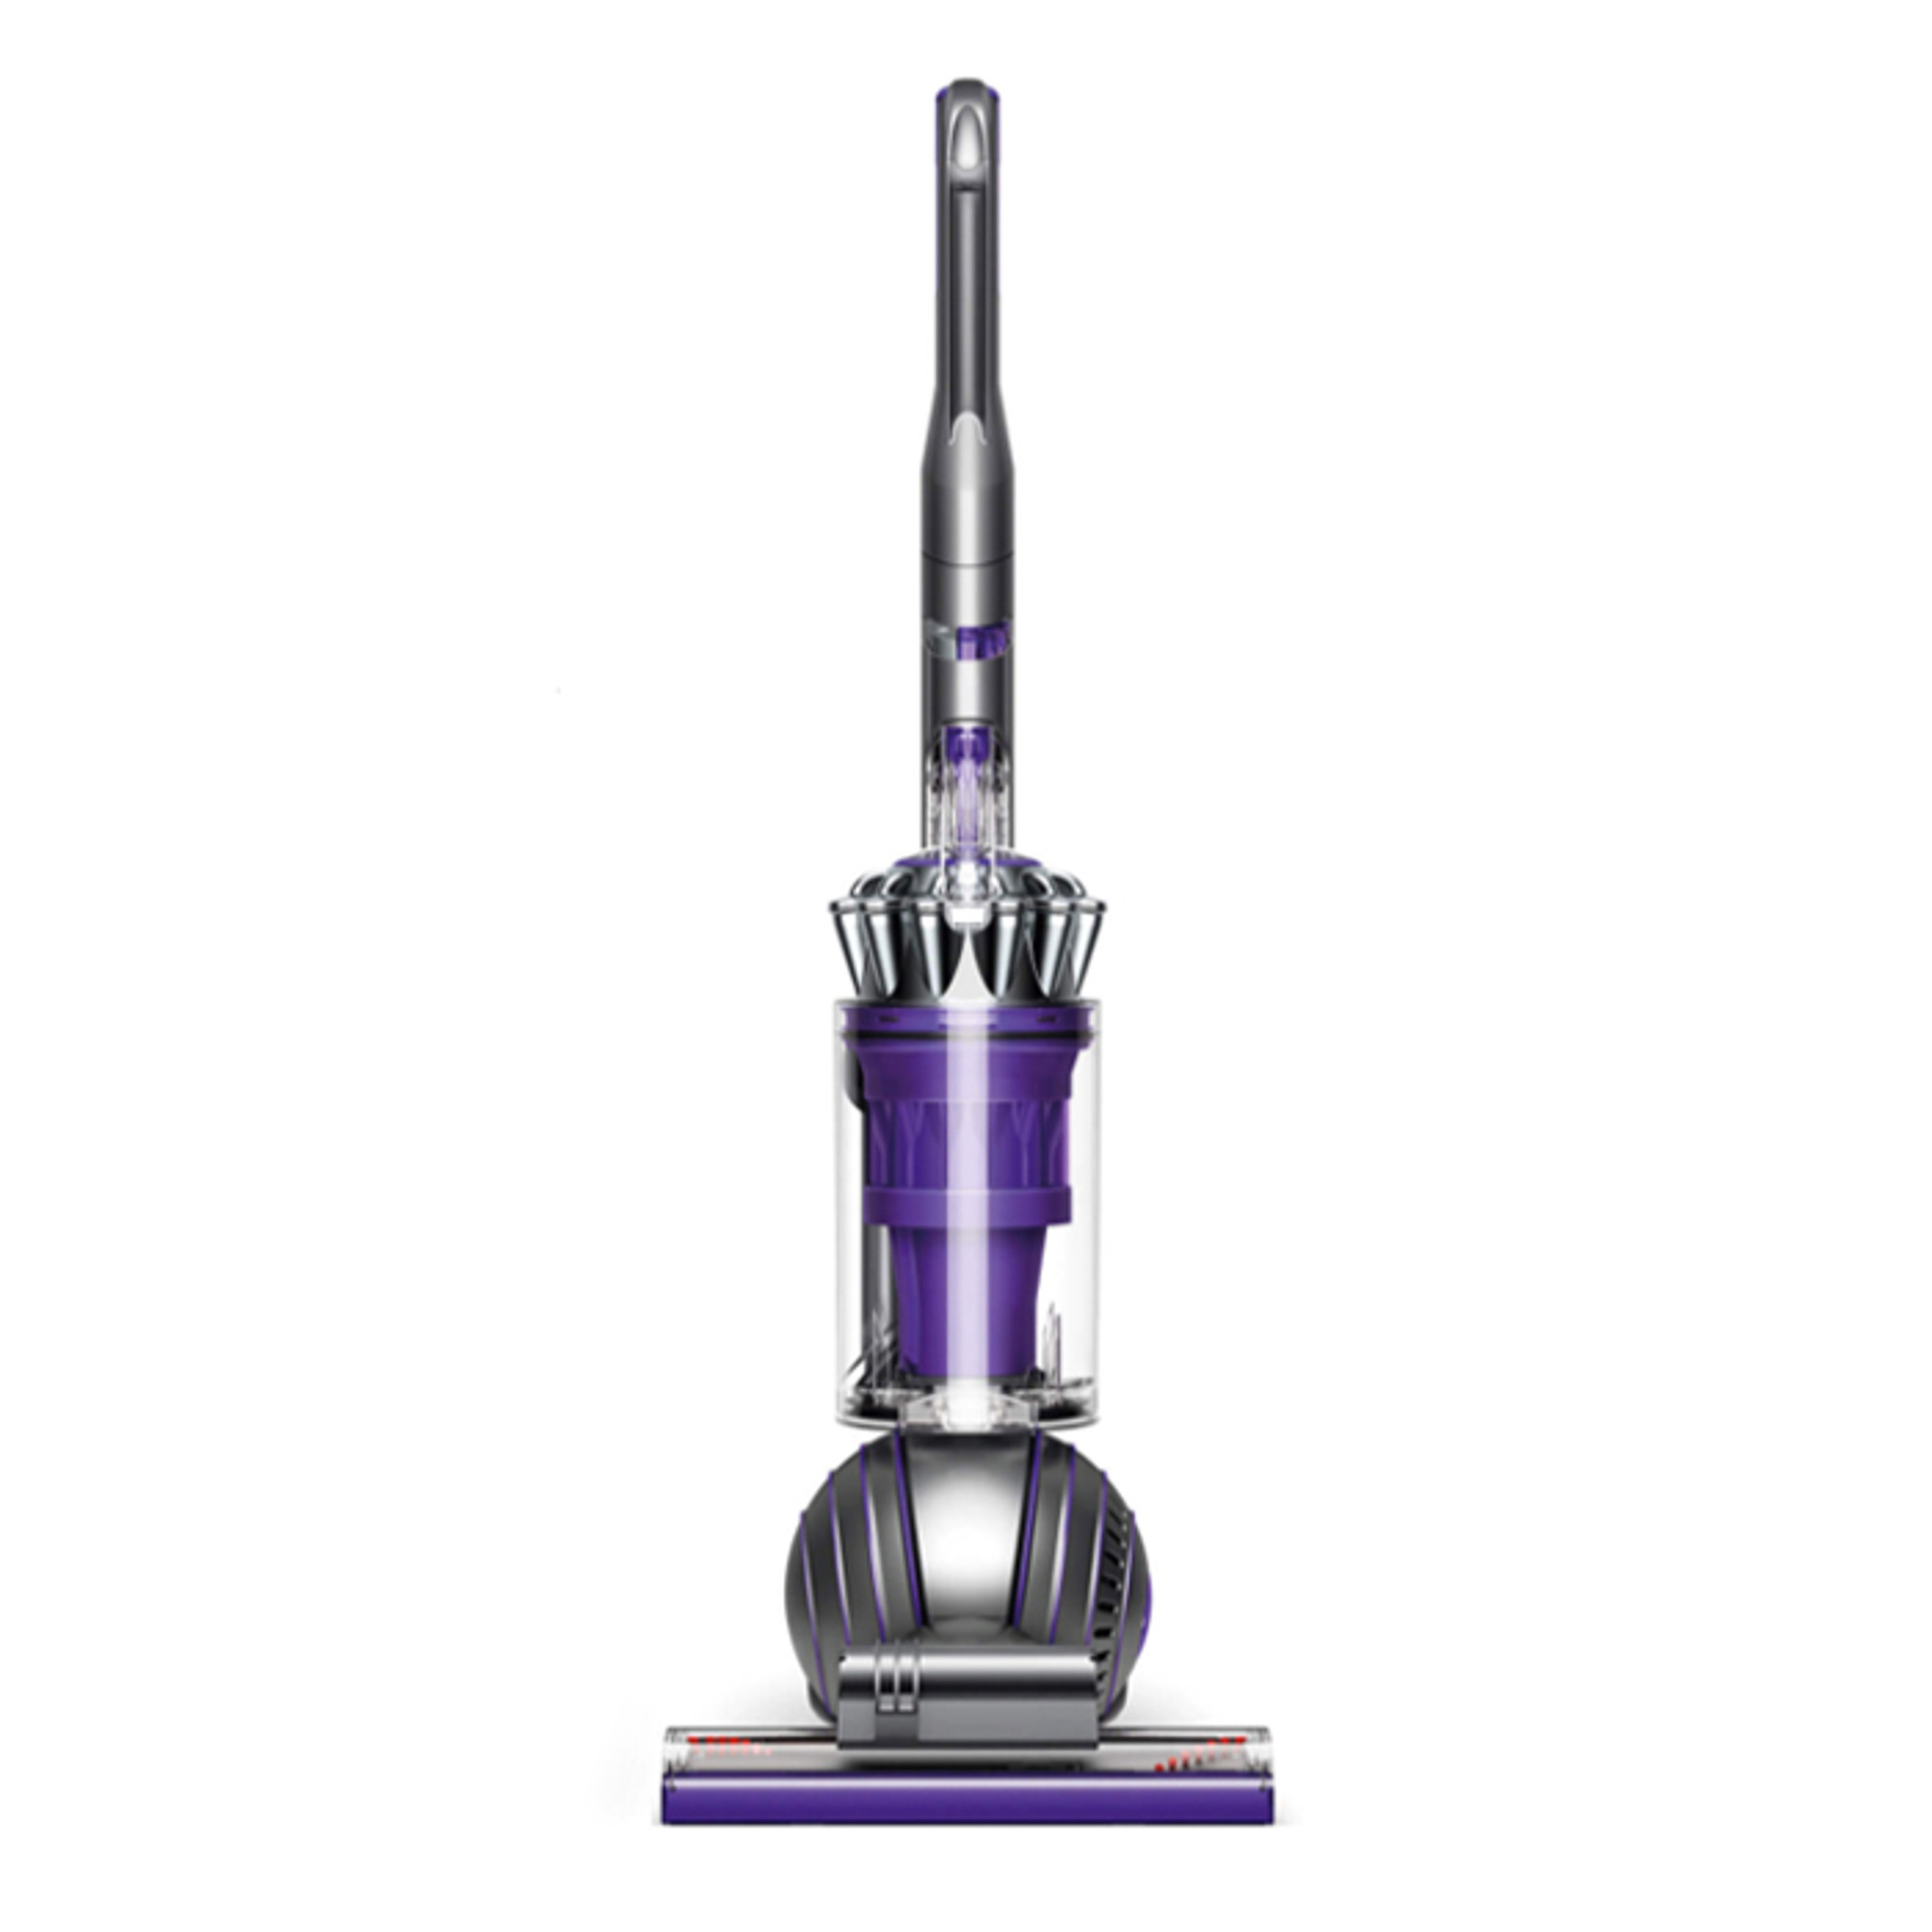 dyson ball animal 2 bagless upright vacuum cleaner 60697.1490119800